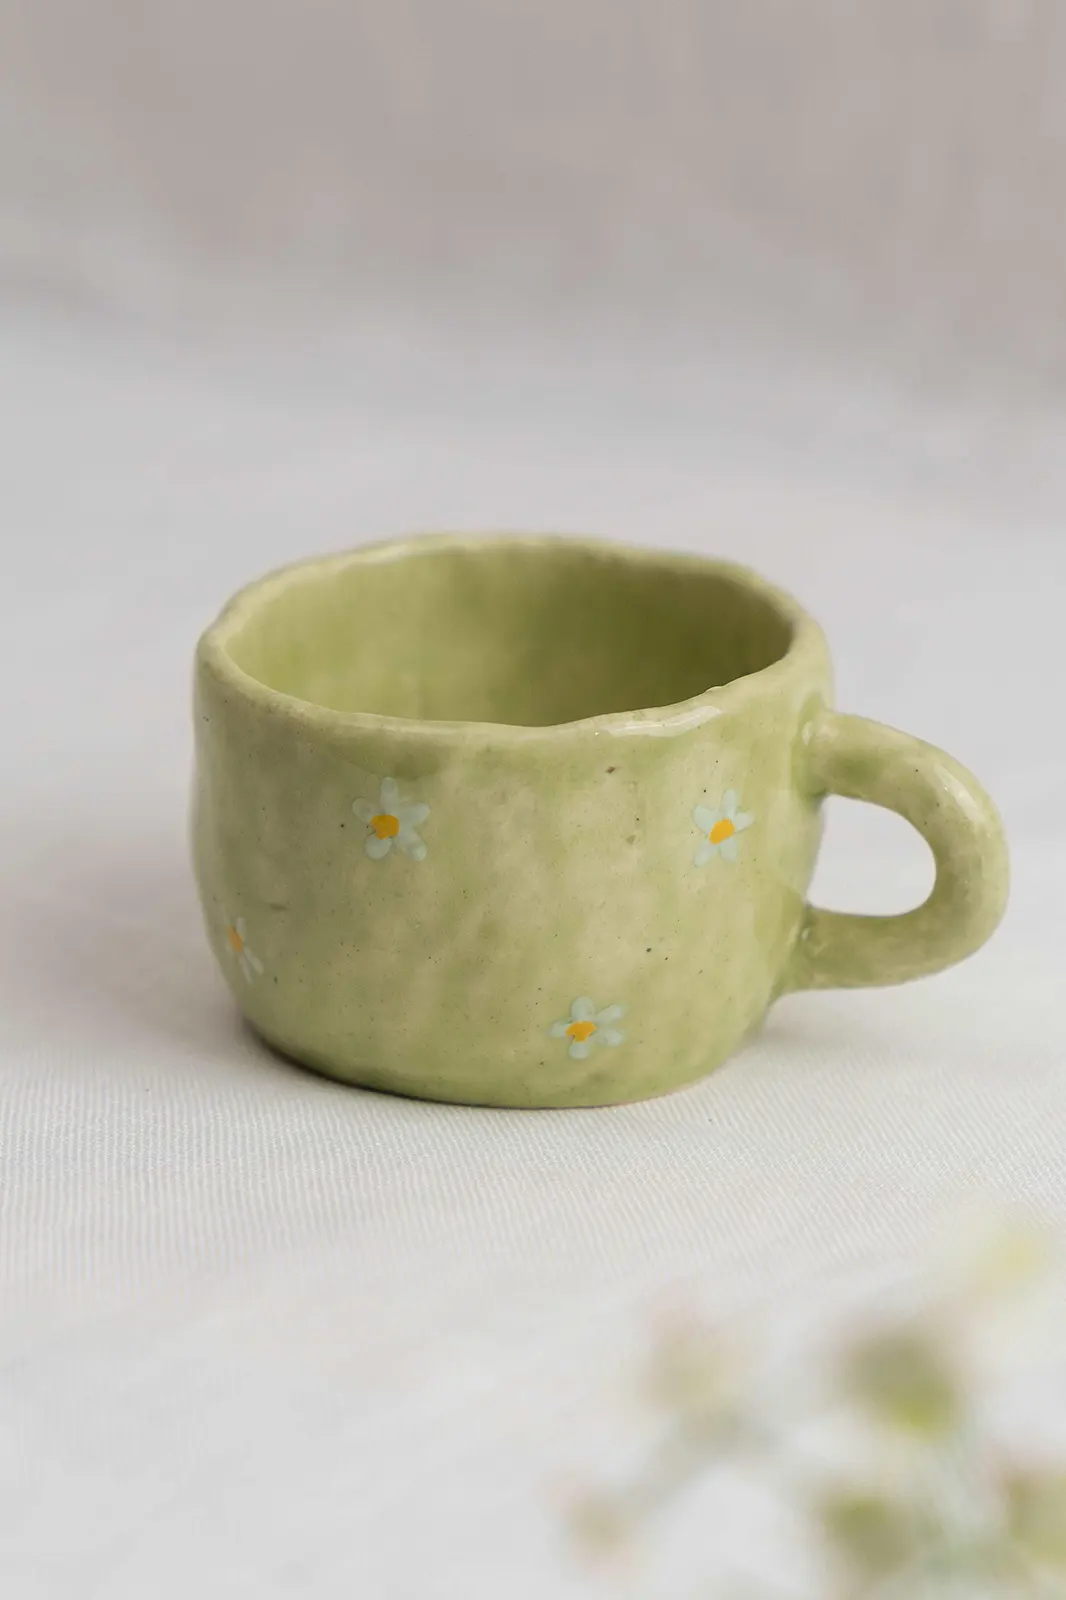 Olive ceramic hand pinched coffee tea mug set of 4, coffee mug, tea cup, ceramic tea cup, coffee cup, green cup, ceramic mugs, coffee mug, coffee mug ceramic, hand painted mug, handmade mug, coffee mug ceramic, eco friendly coffee cup, Toh, Sepia Stories